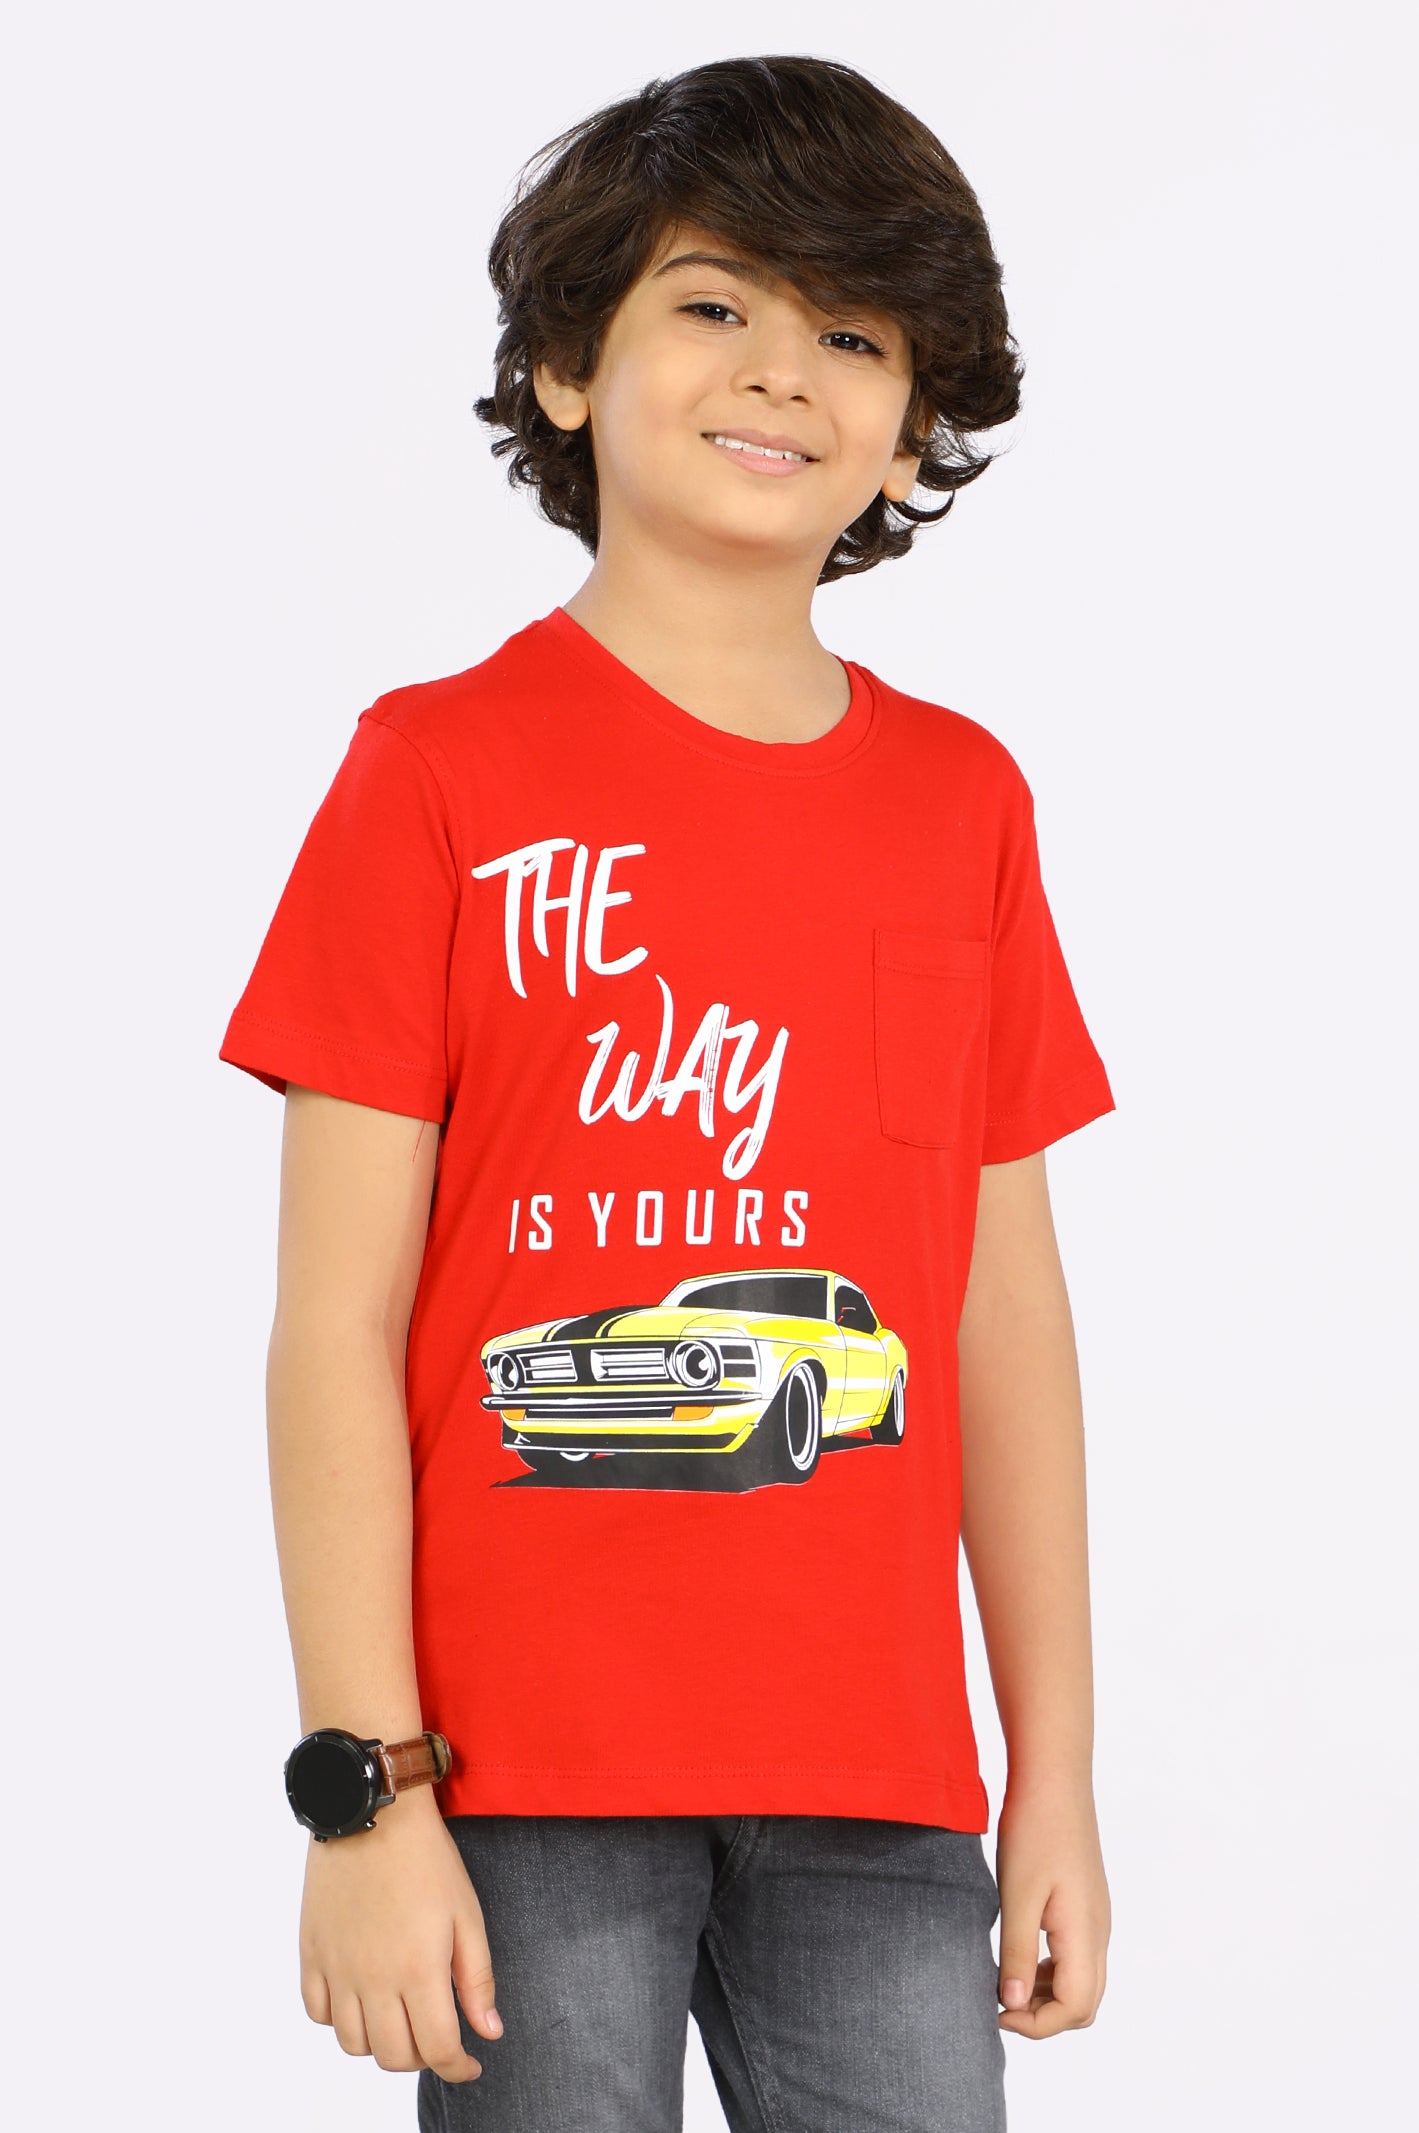 Car Print T-Shirt From Diners